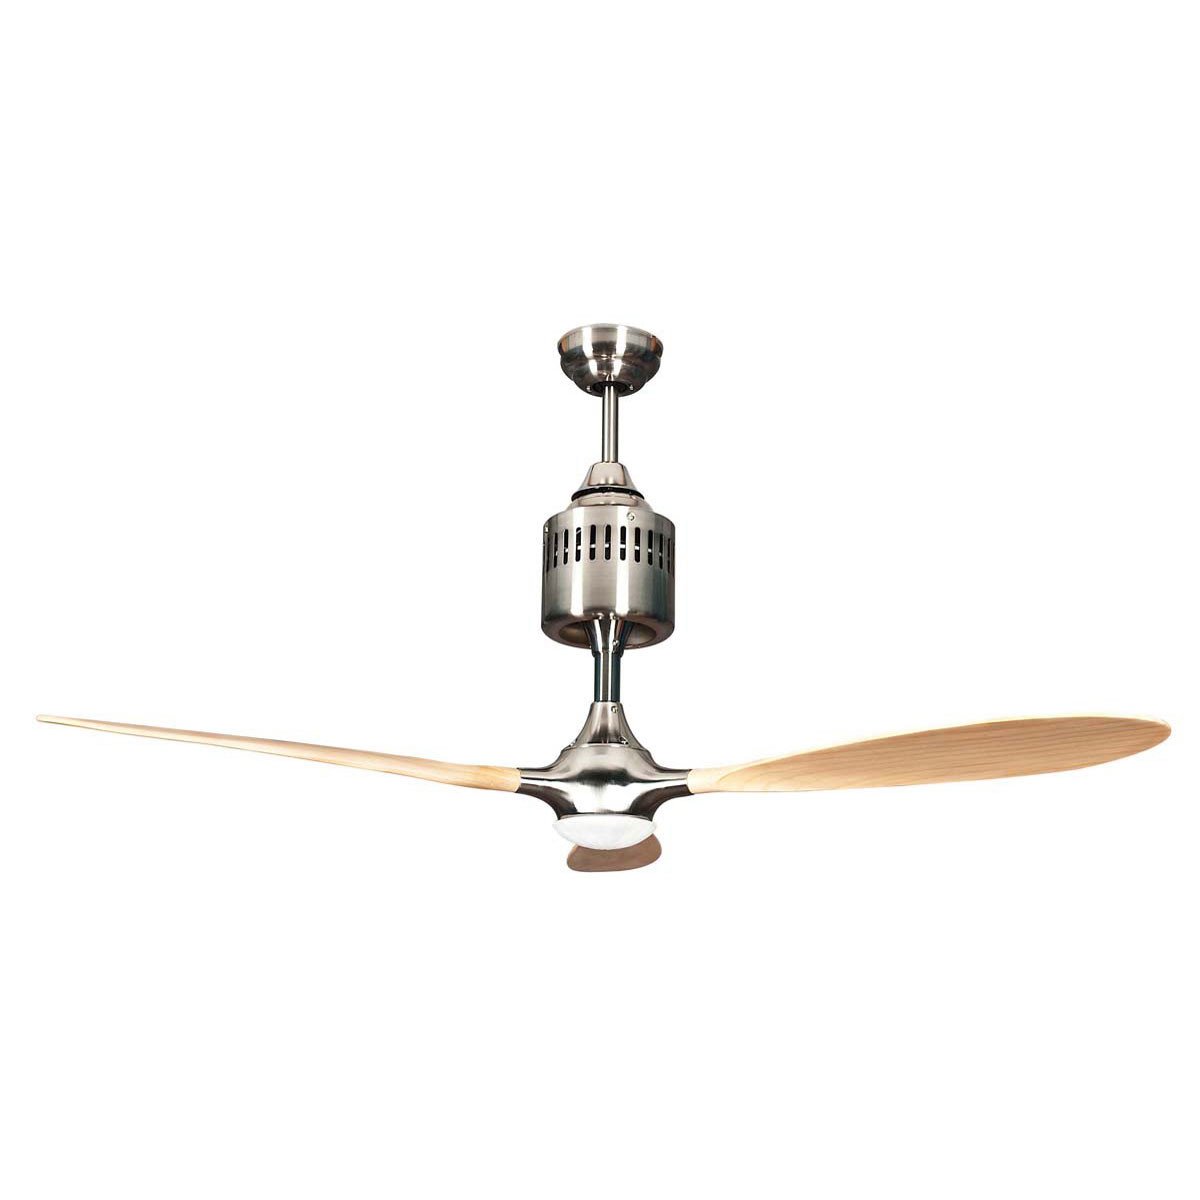 Concord Fans 60" Pilot Modern Stainless Steel Ceiling Fan with Light & Remote